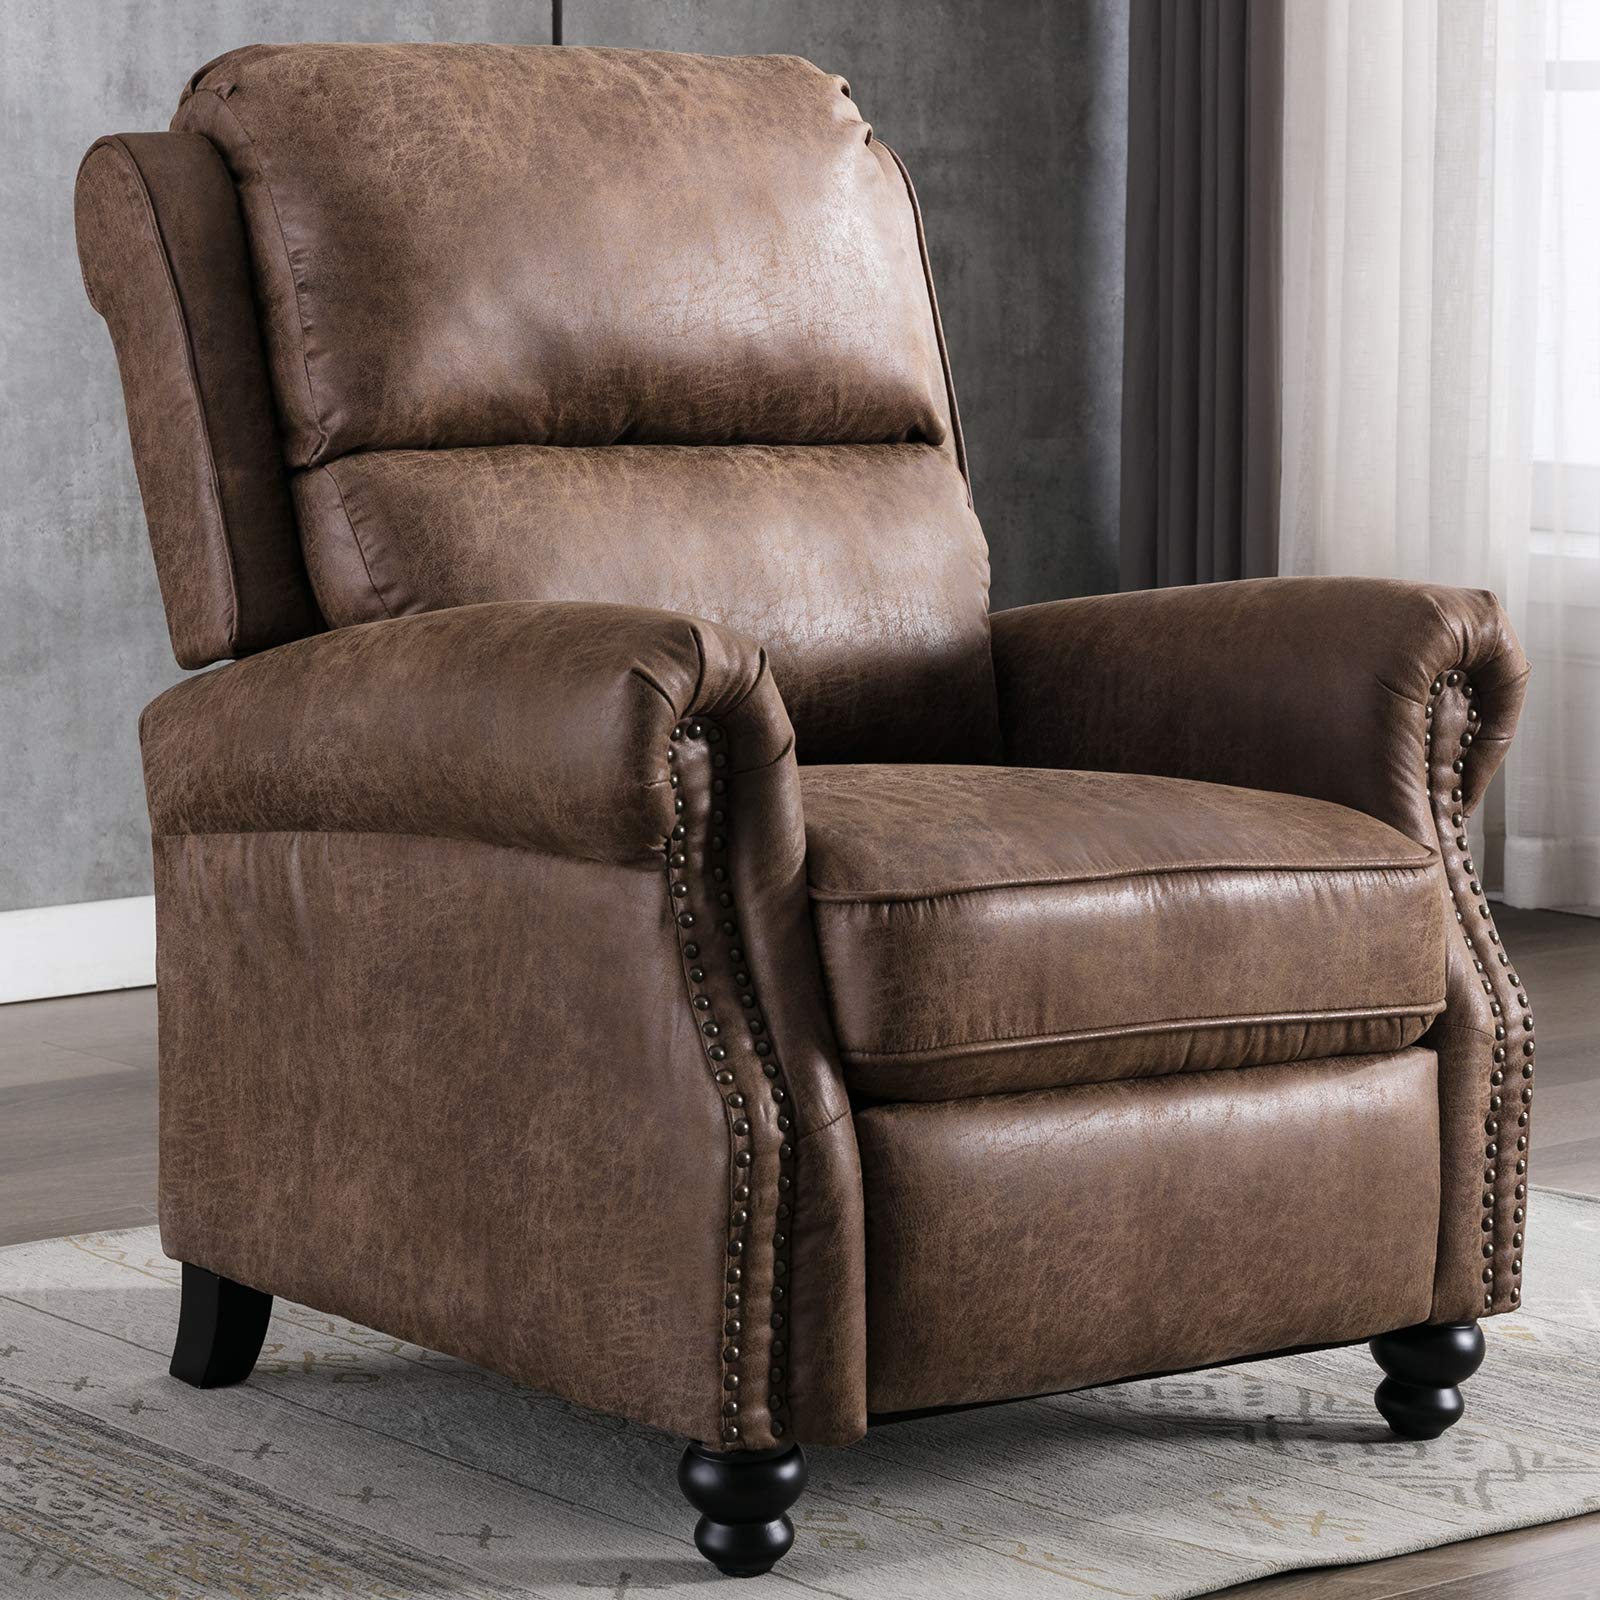 cANMOV Pushback Recliner chair Leather Armchair Push Back Recliner with Rivet Decoration Single Sofa Accent chair for Living Roo